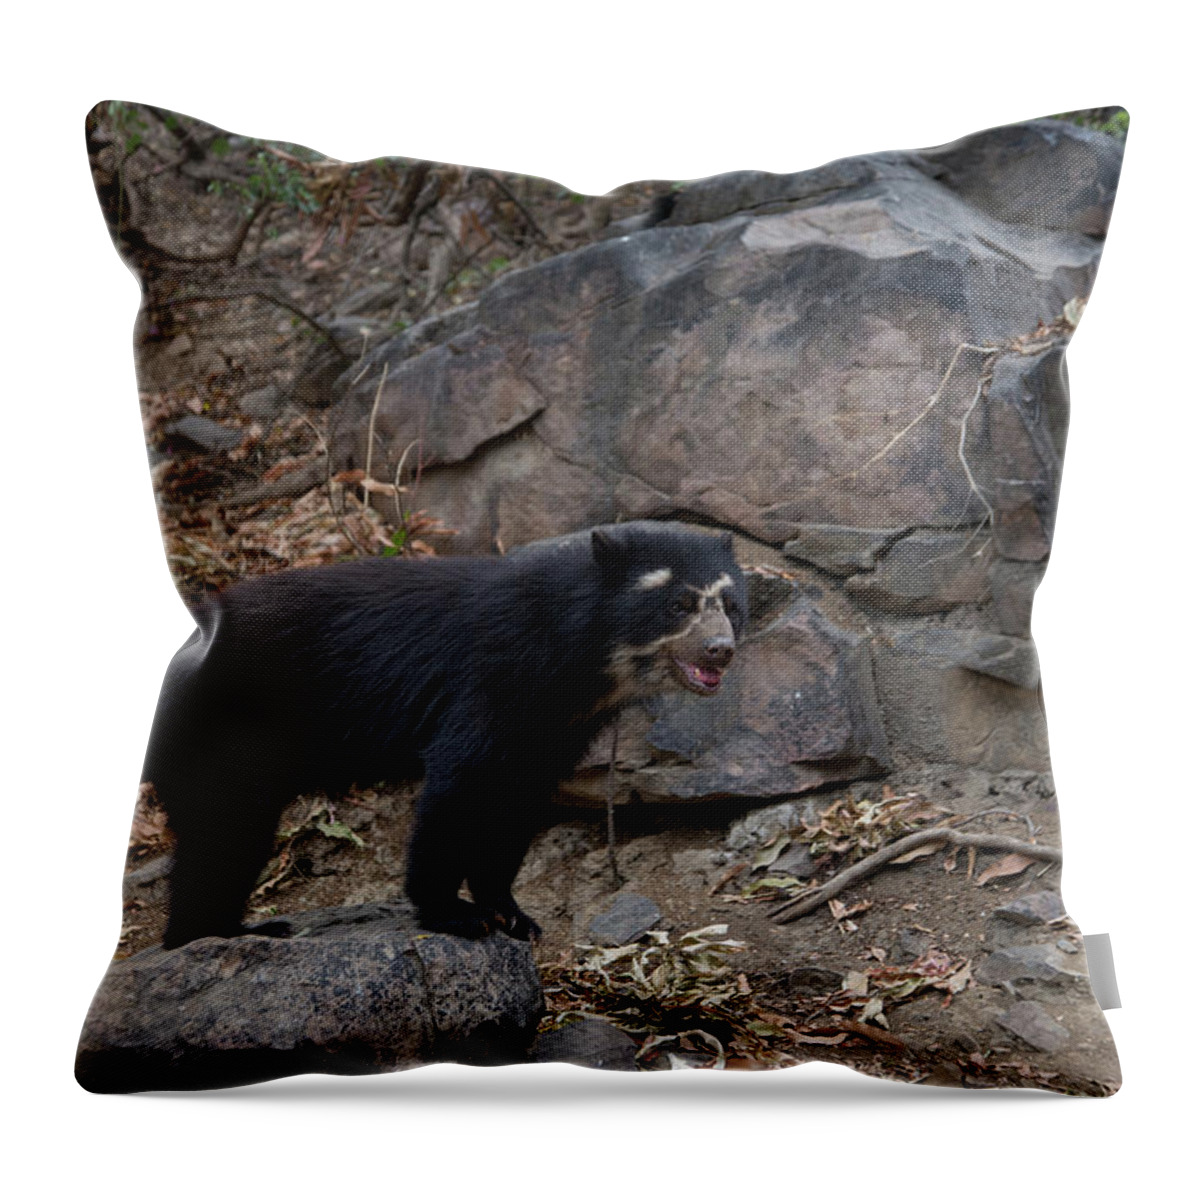 Andean Bear Throw Pillow featuring the digital art Spectacled Bears #11 by Carol Ailles